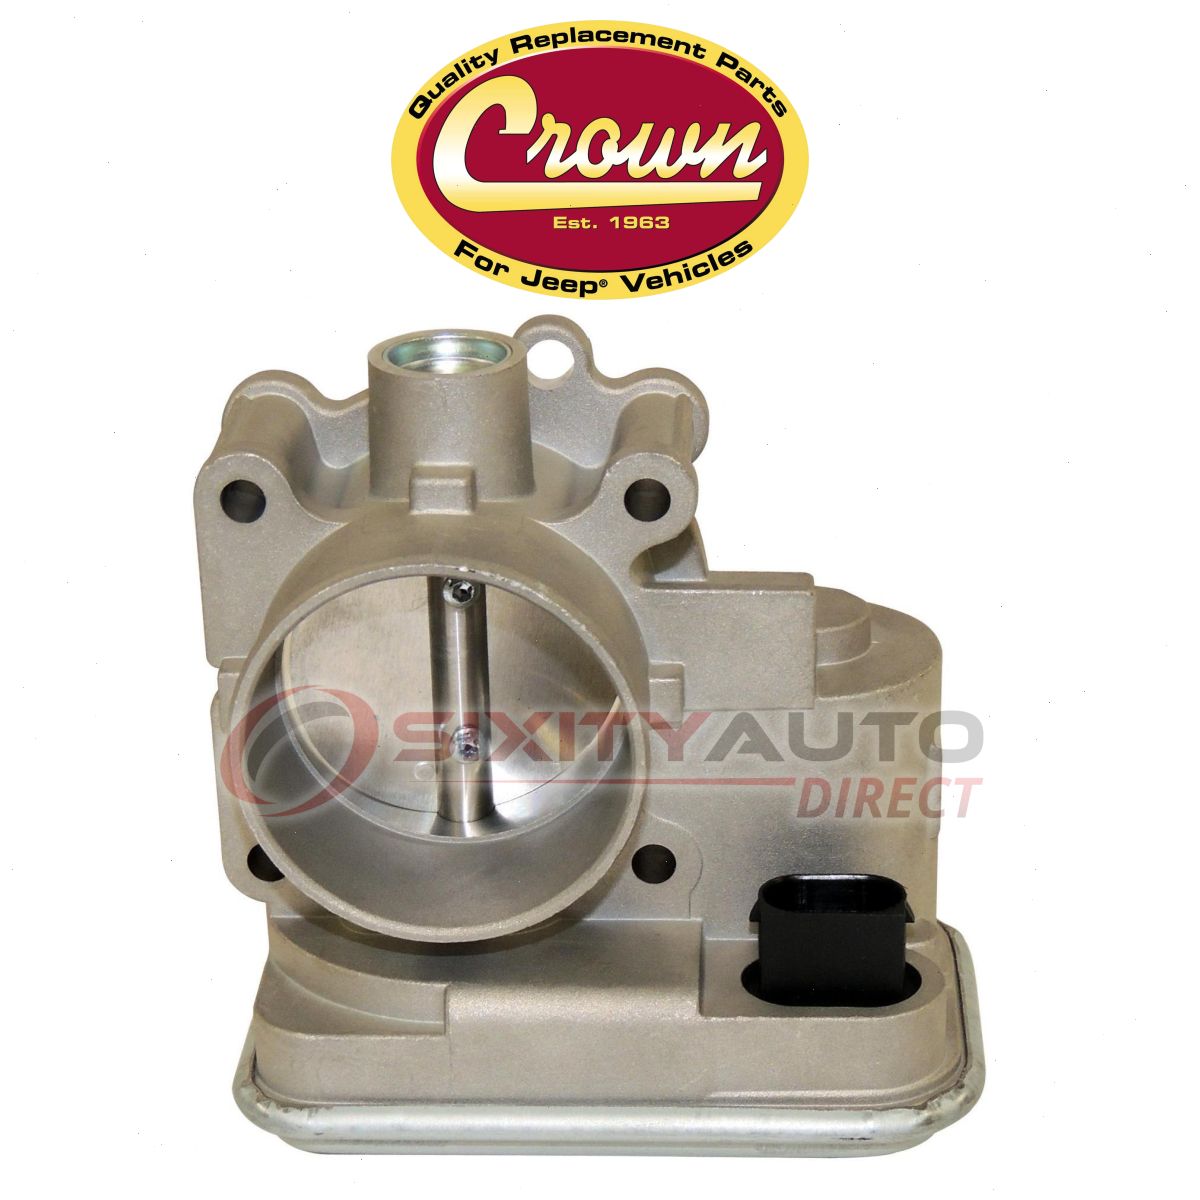 Crown Automotive Fuel Injection Throttle Body for 2009-2018 Dodge Journey xy | eBay